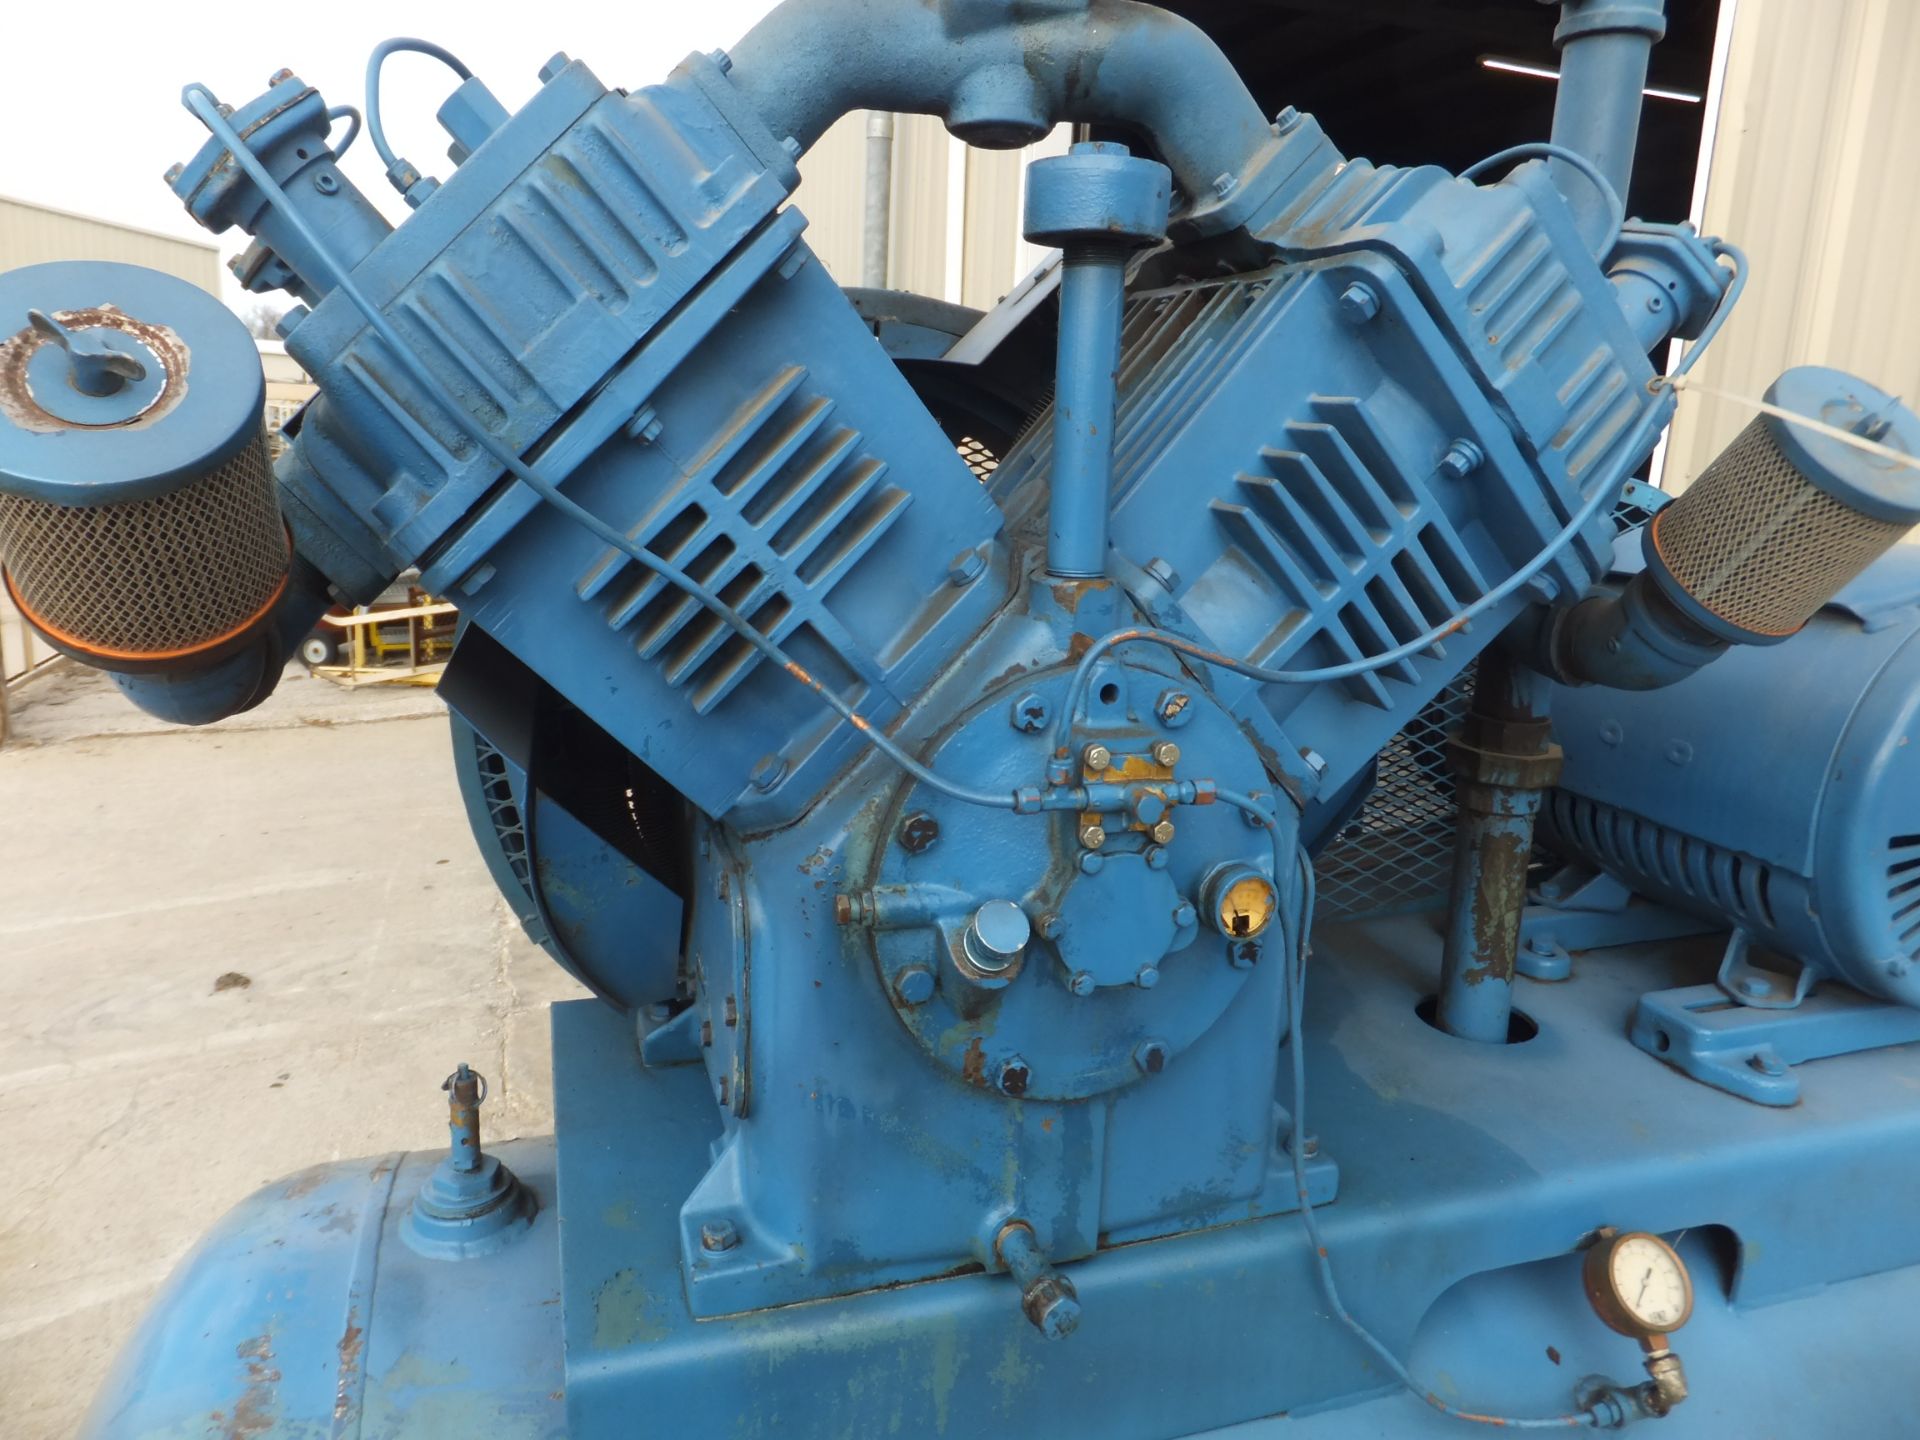 Quincy 25 Hp Reciprocating Air Compressor, Model 5120, S/N 160353 L, Size 6 & 3-1/4 x 4, Lincoln - Image 8 of 10